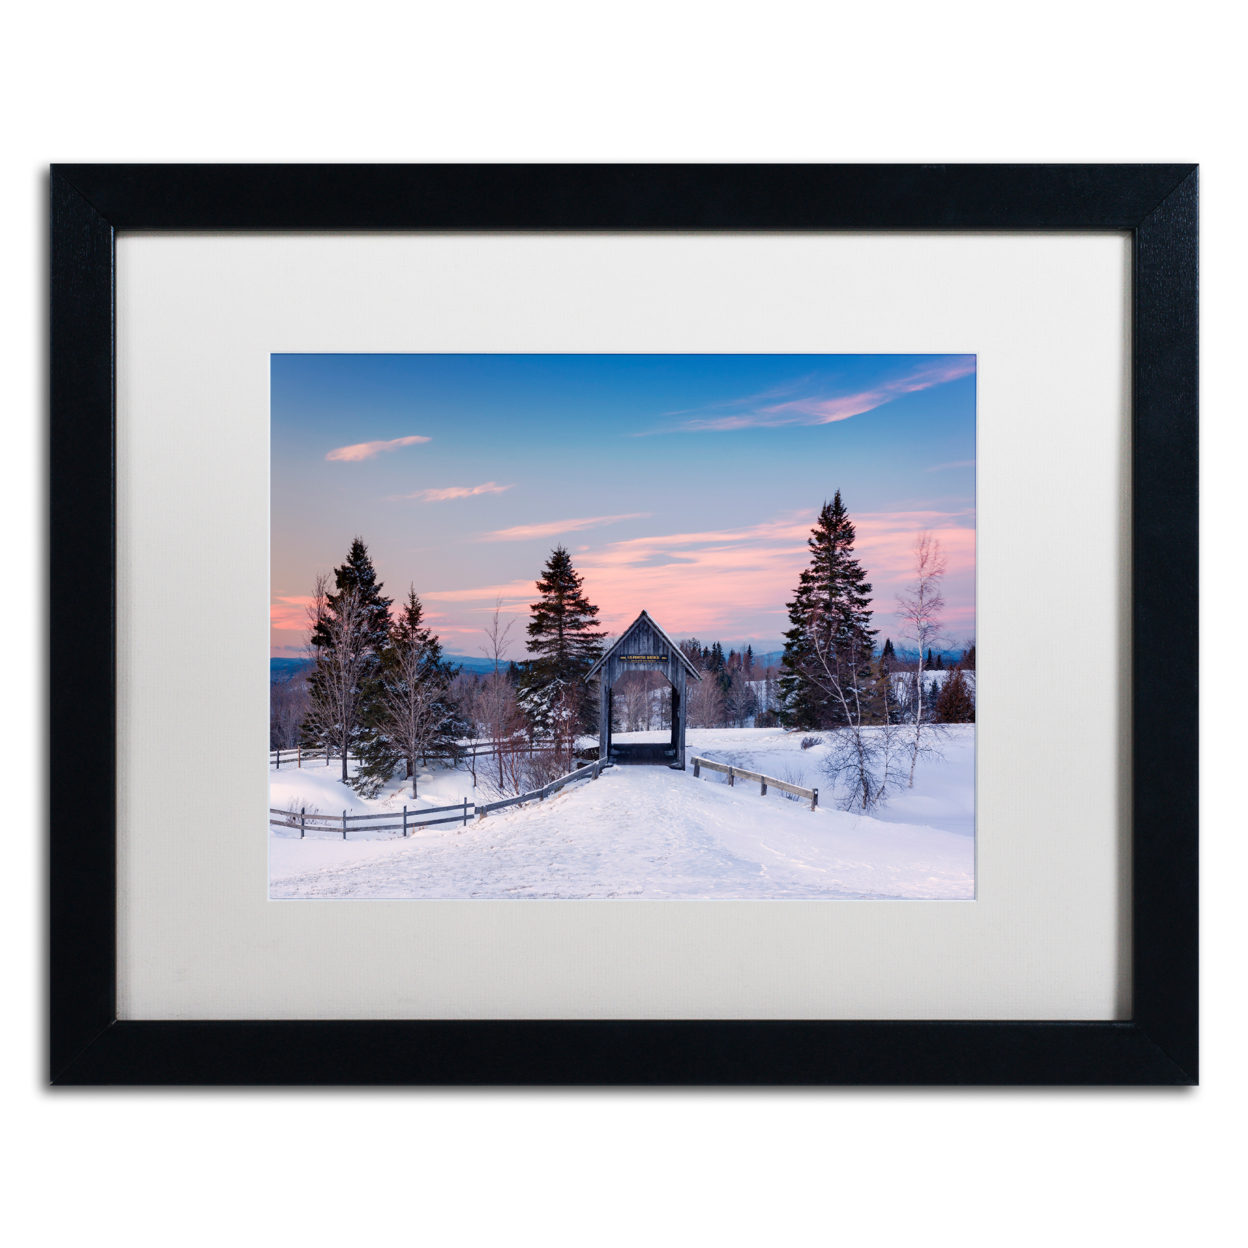 Michael Blanchette Photography 'Snow At The Bridge' Black Wooden Framed Art 18 X 22 Inches